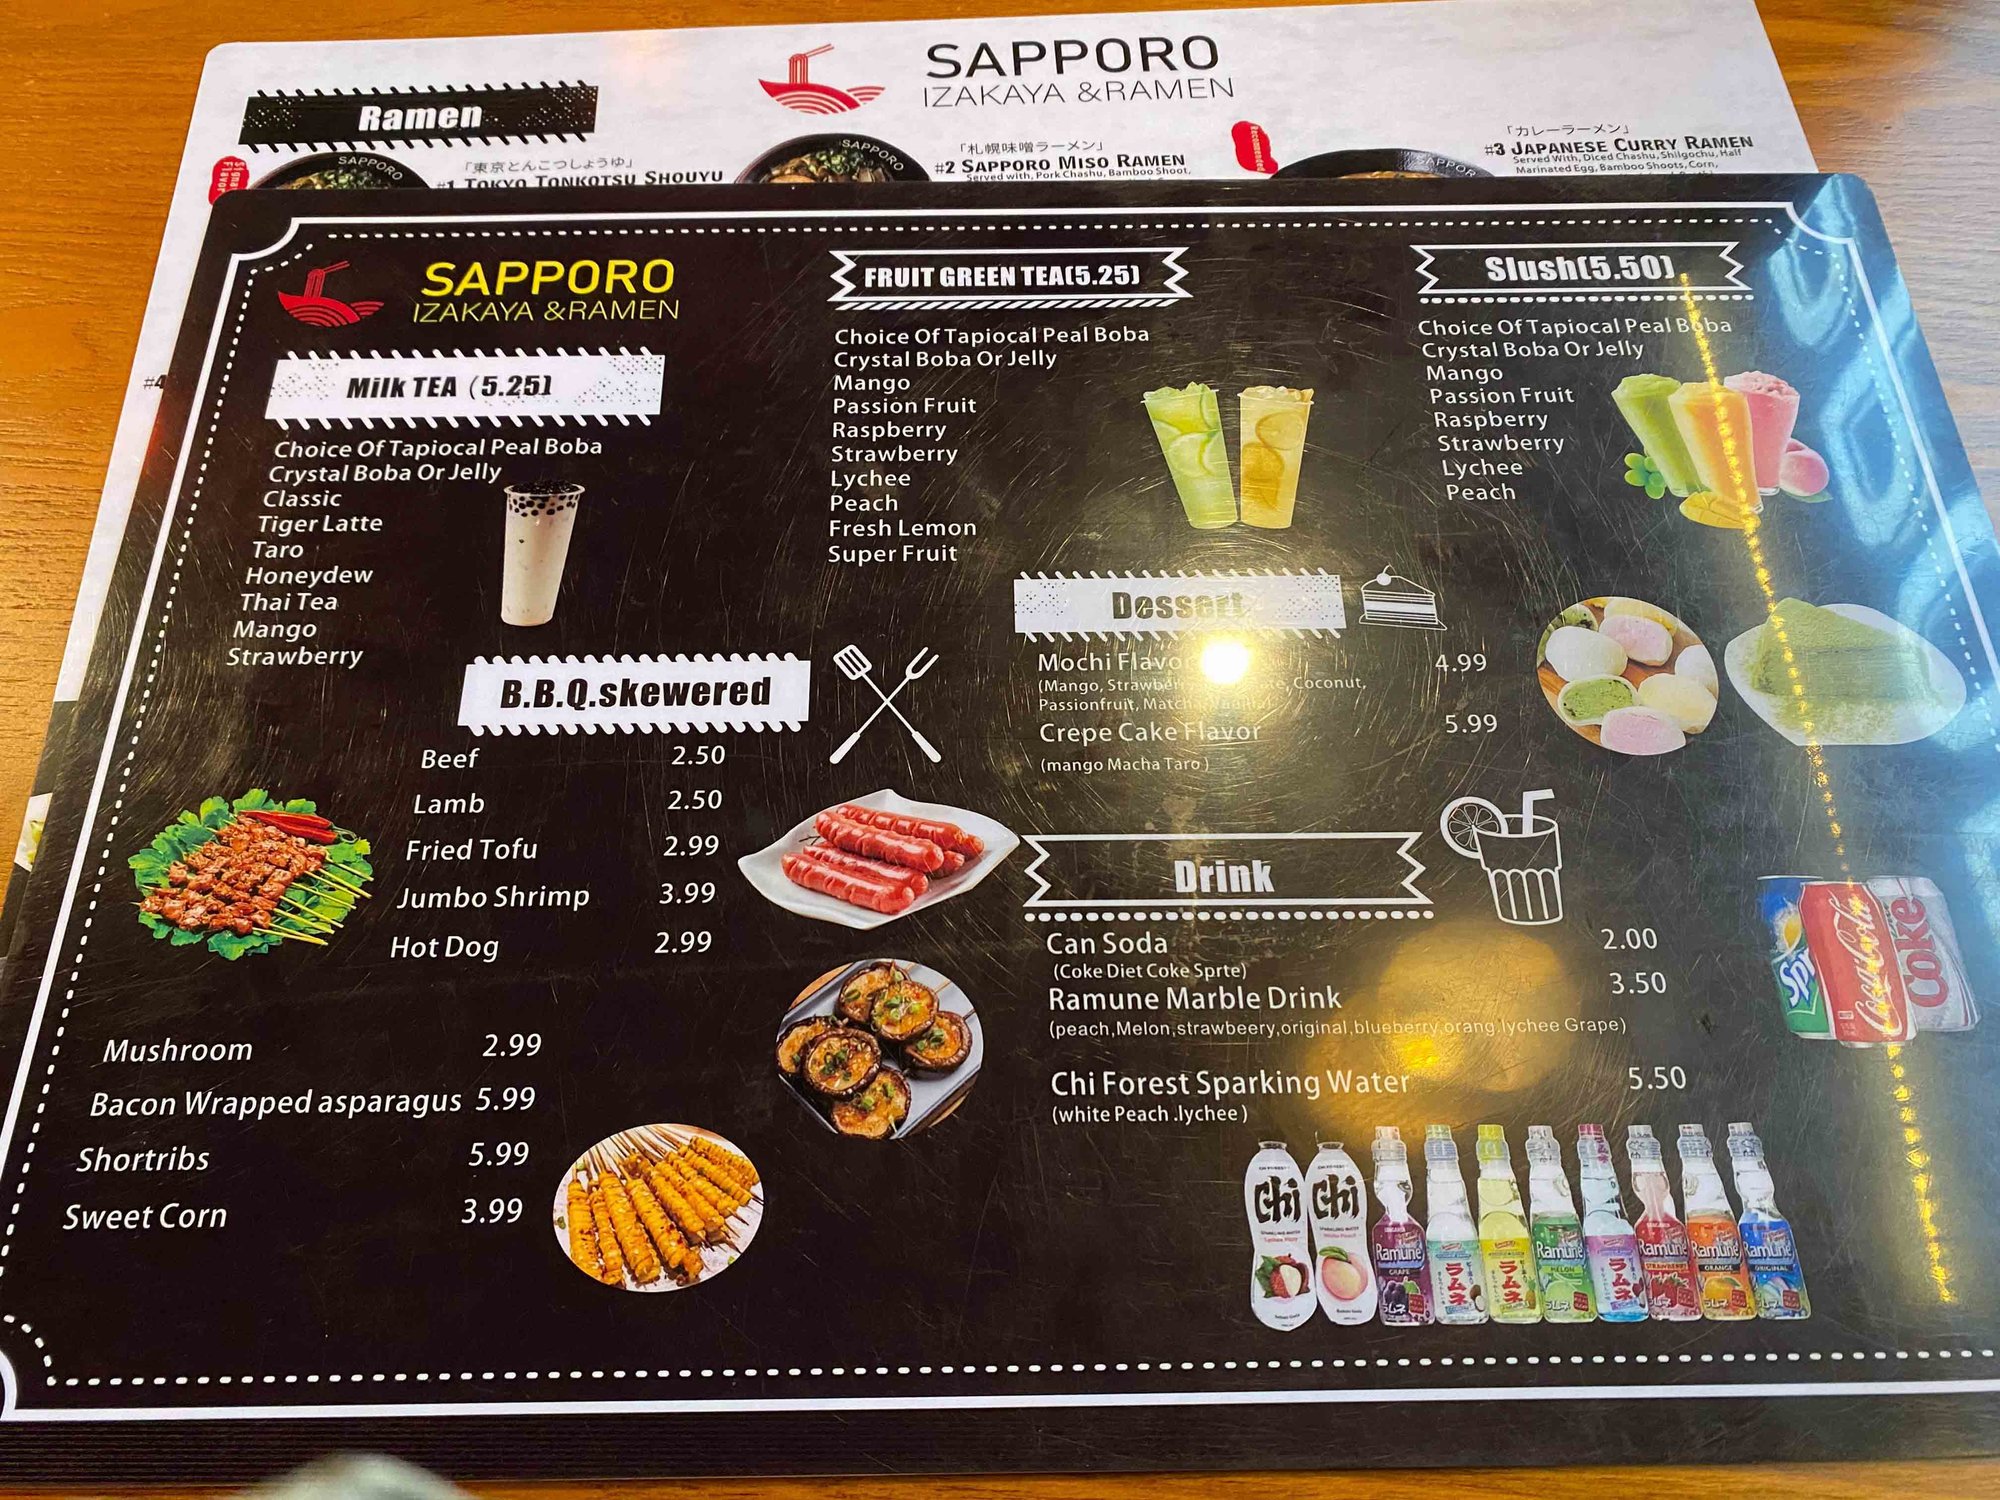 black menu with pictures and menu items